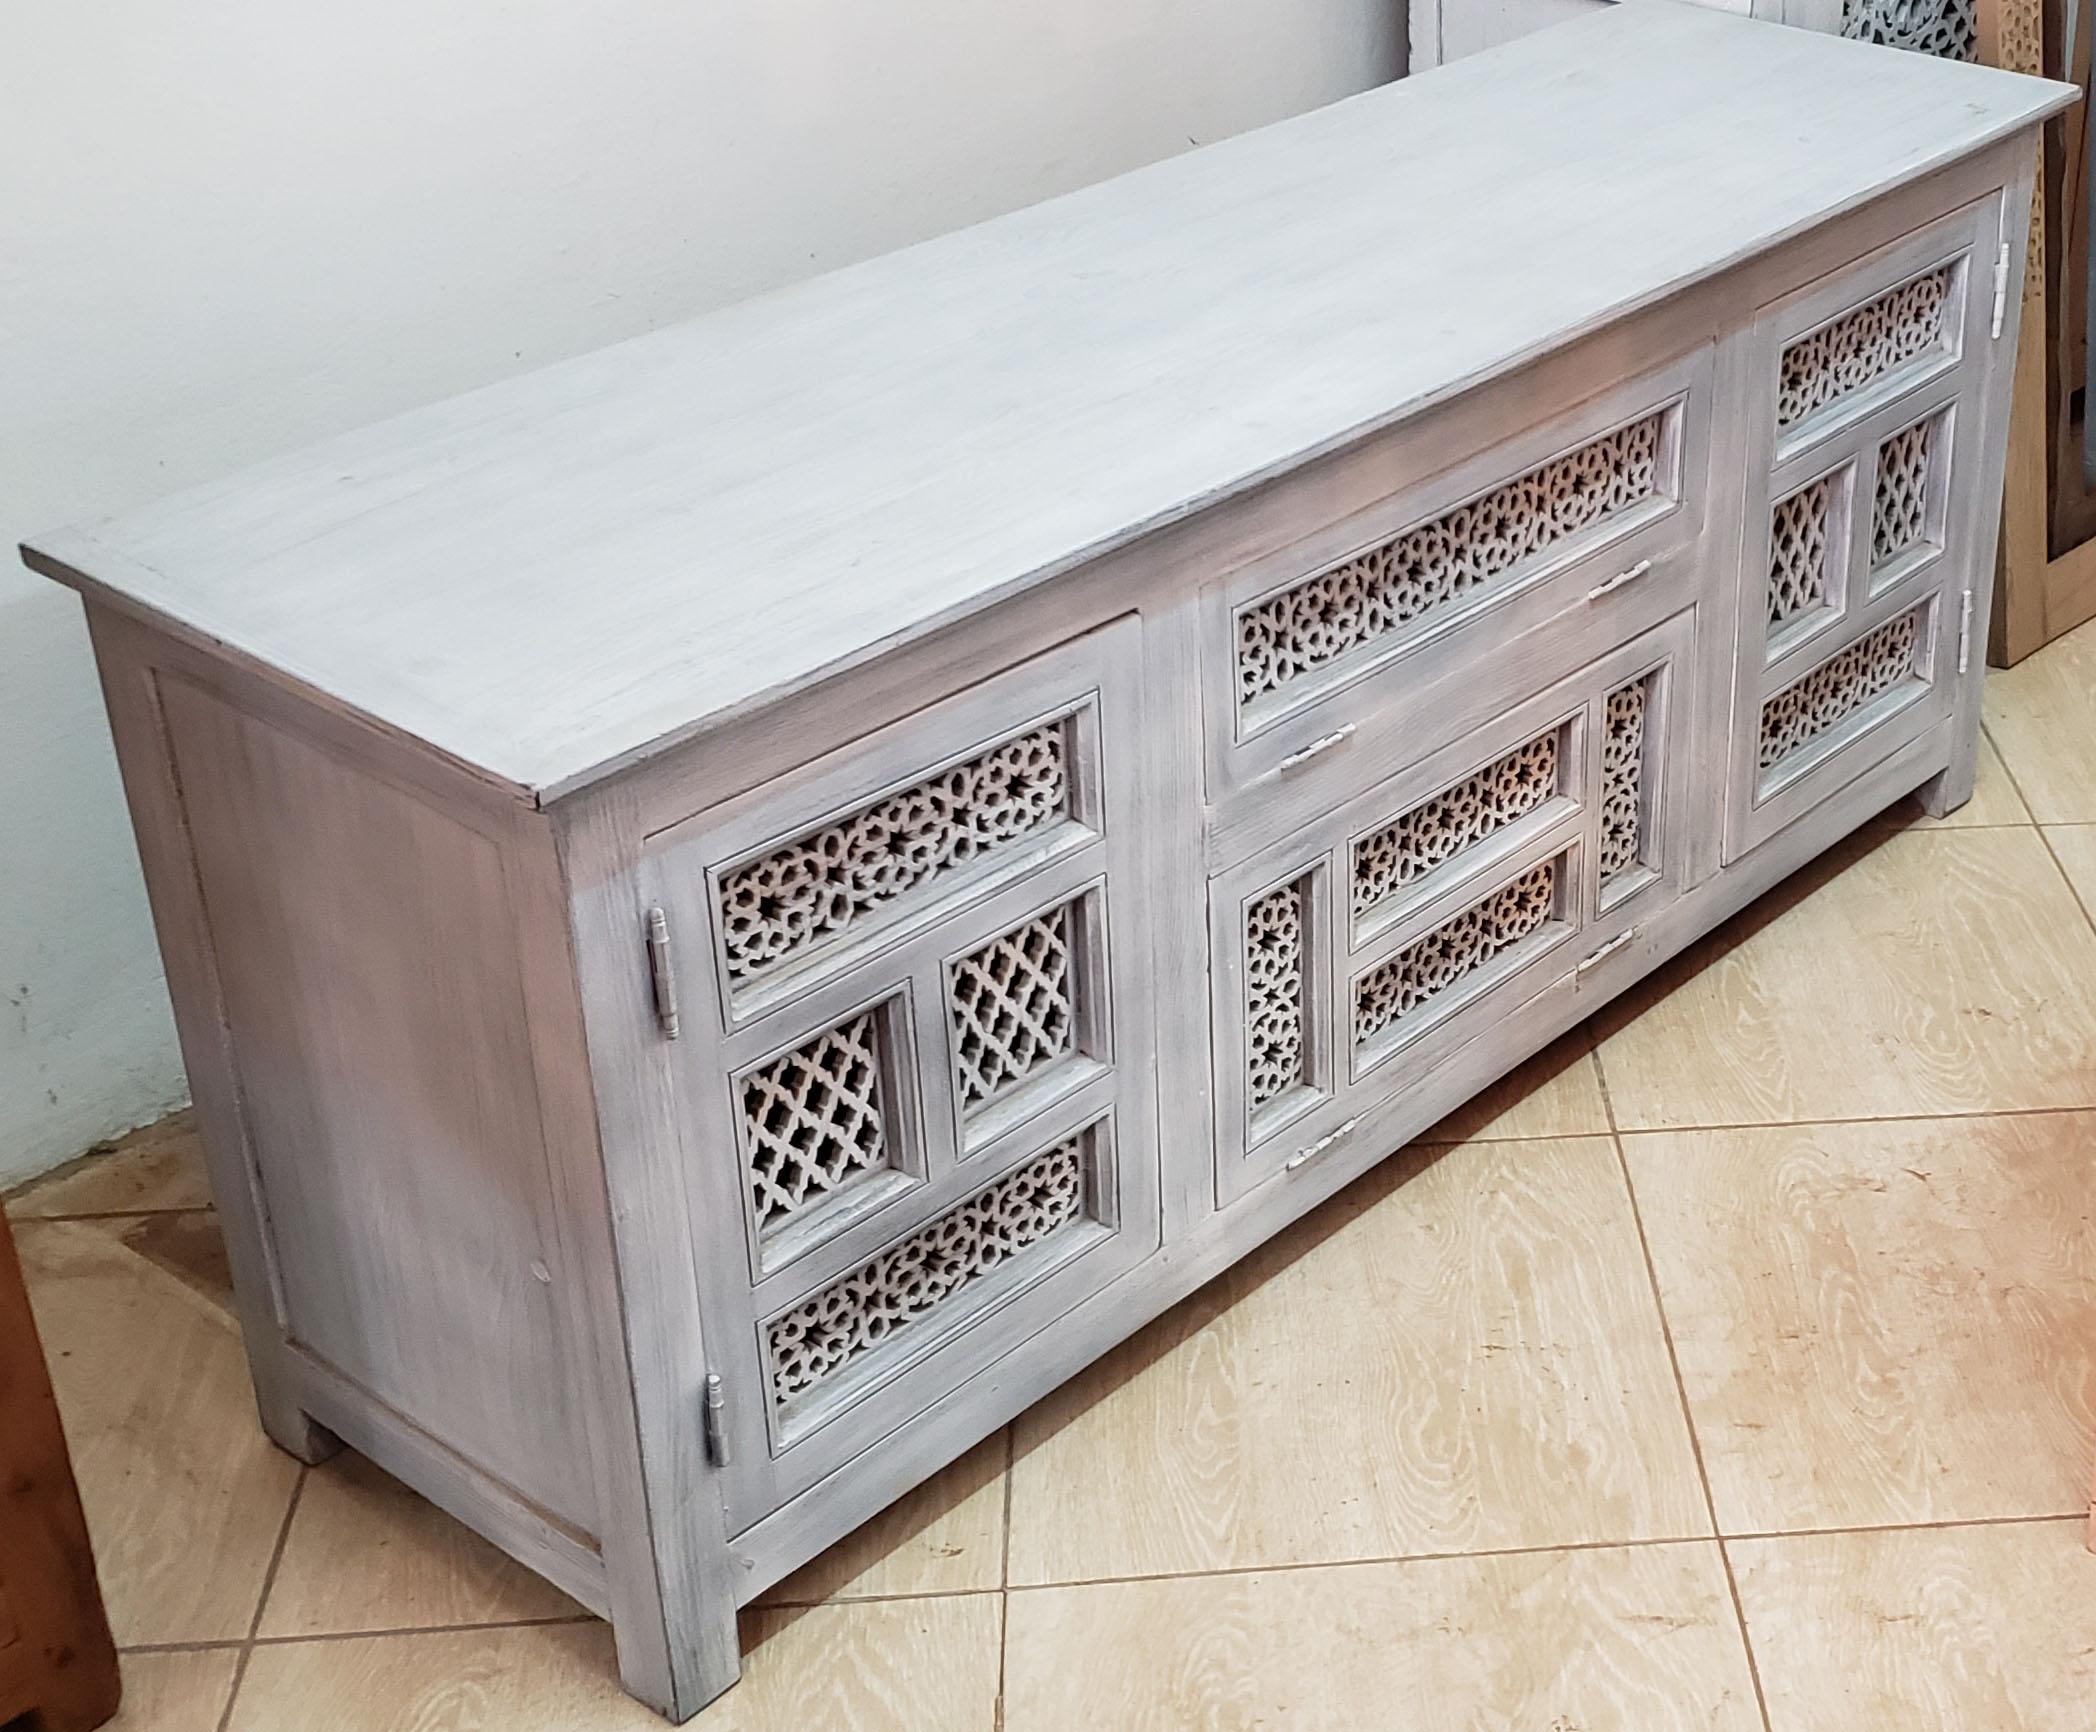 One of the few Moroccan media stands we currently have in stock. This one is a very solid Cedar wood TV cabinet, with plenty of storage space, and can be used as a TV Stand, aquarium support base, small blanket chest, or just stand alone as a show